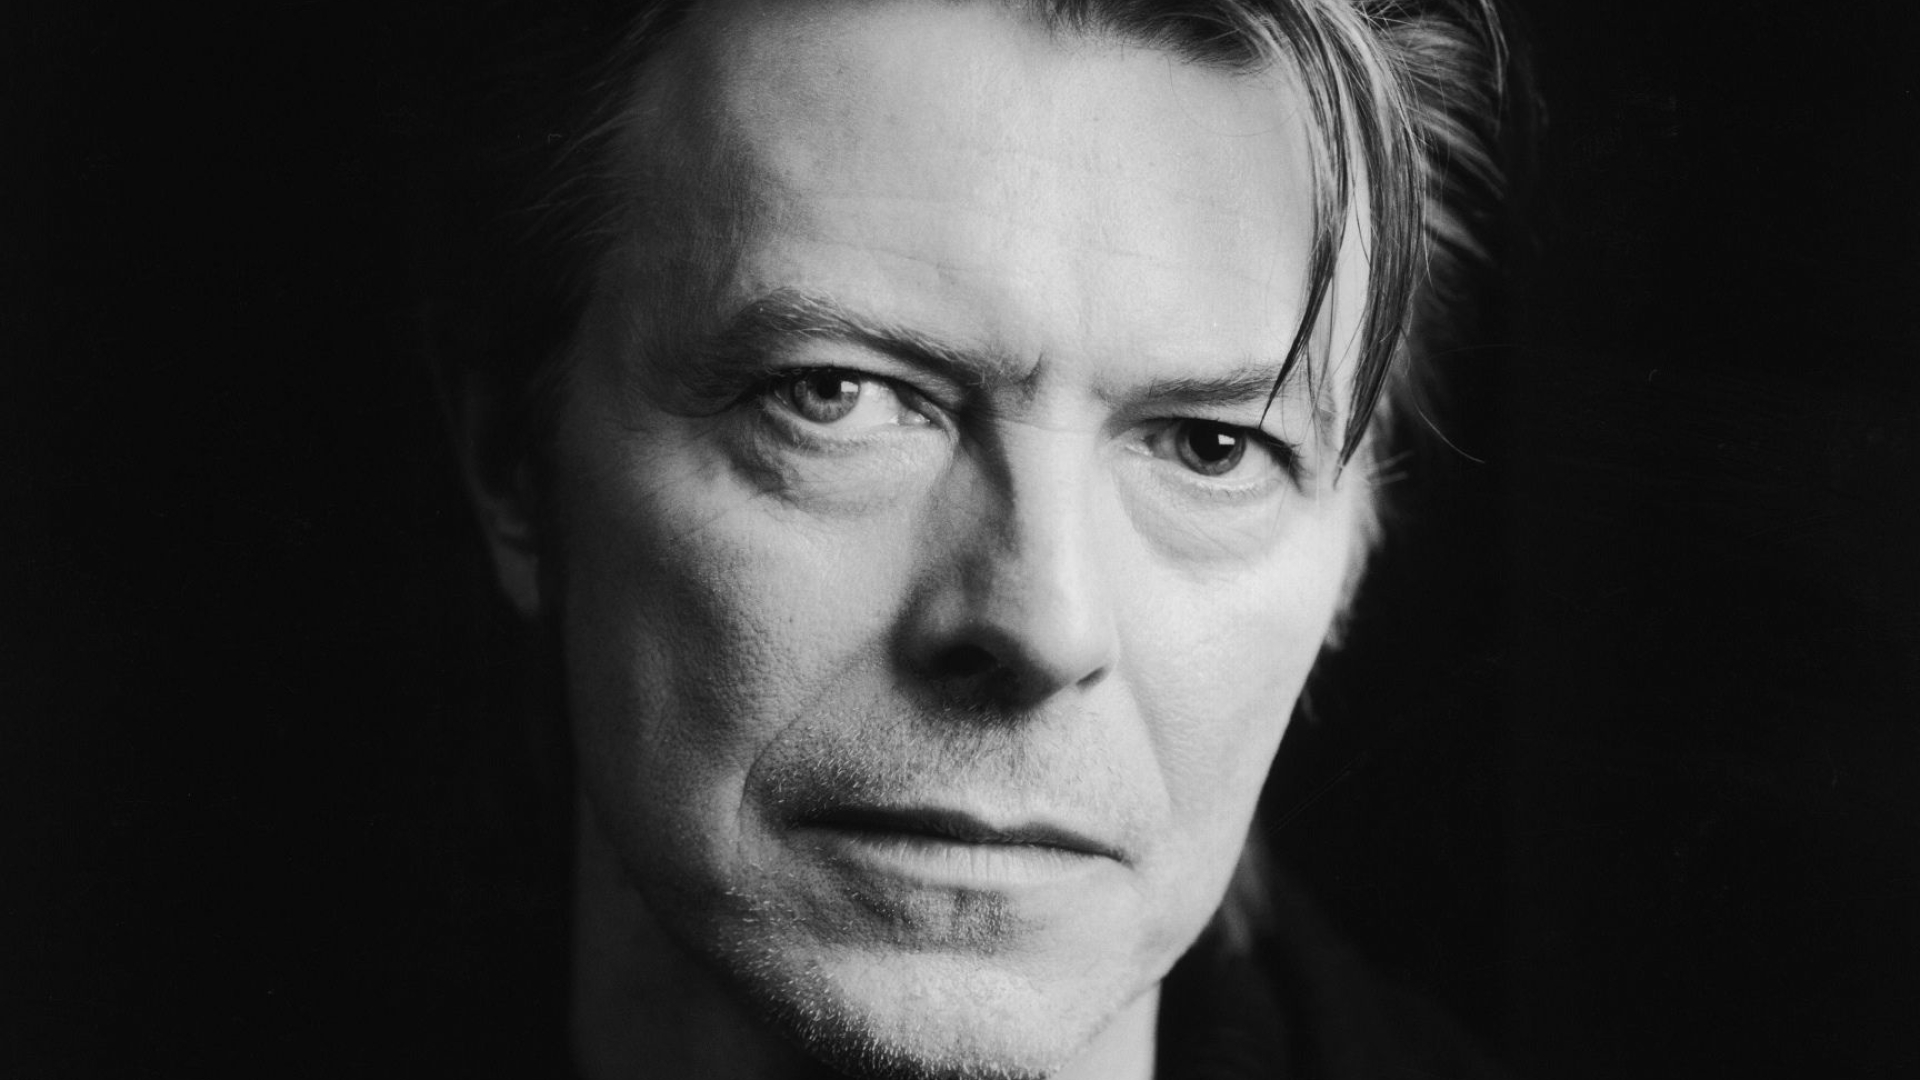 David Bowie: "Memory of a Free Festival" was originally recorded in September 1969. 1920x1080 Full HD Wallpaper.